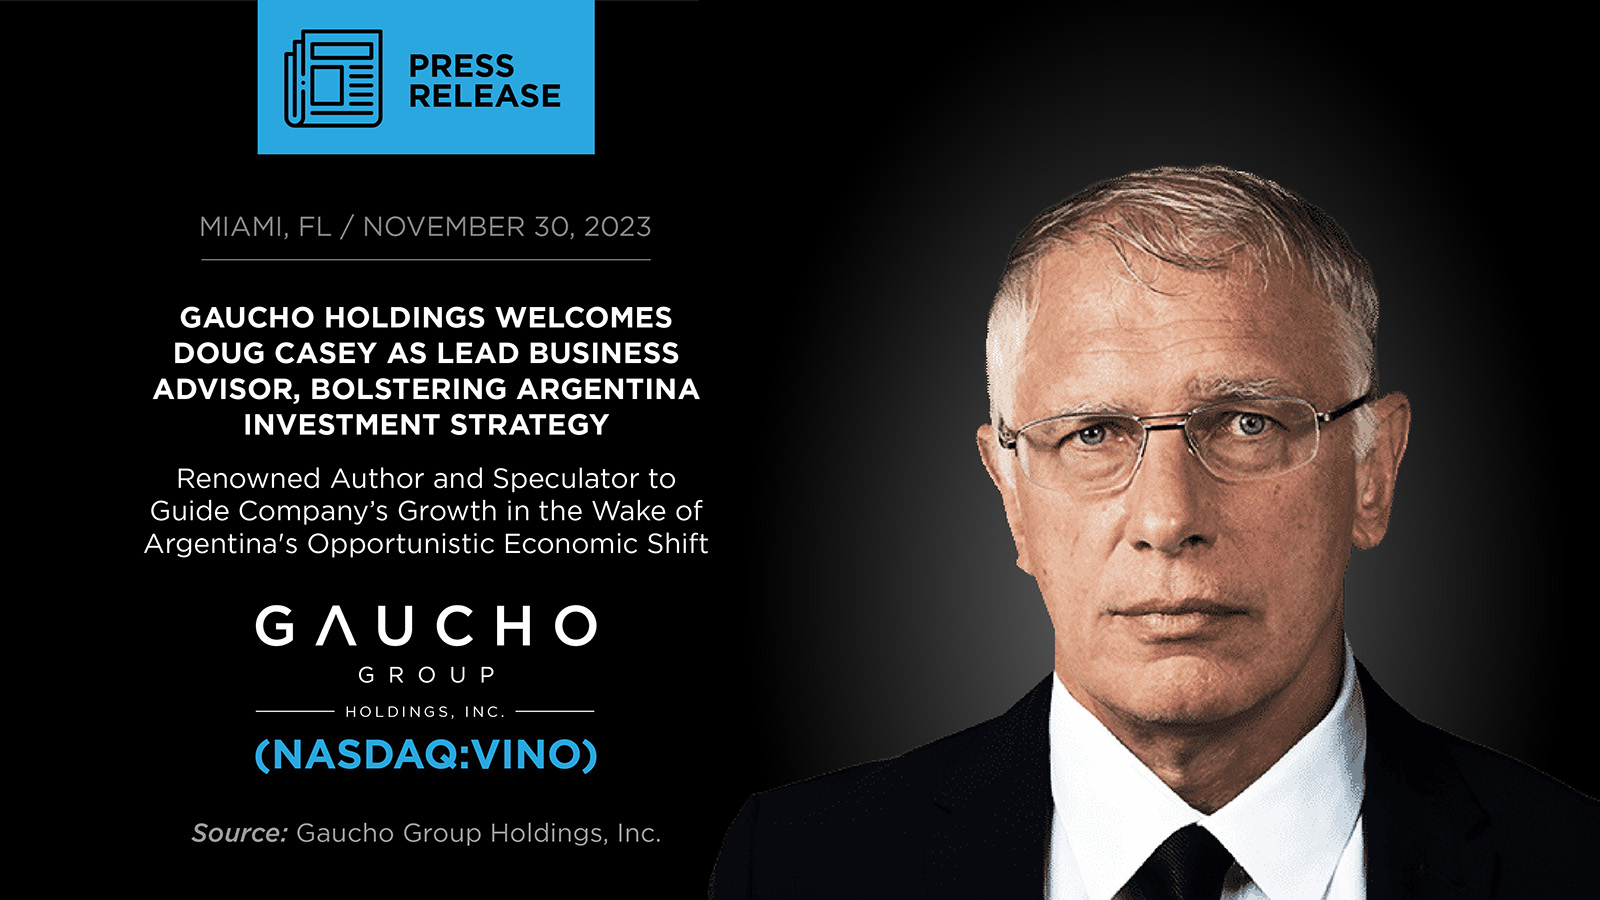 GAUCHO HOLDINGS WELCOMES DOUG CASEY AS LEAD BUSINESS ADVISOR, BOLSTERING ARGENTINA INVESTMENT STRATEGY  Renowned Author and Speculator to Guide Company’s Growth in the Wake of Argentina's Opportunistic Economic Shift